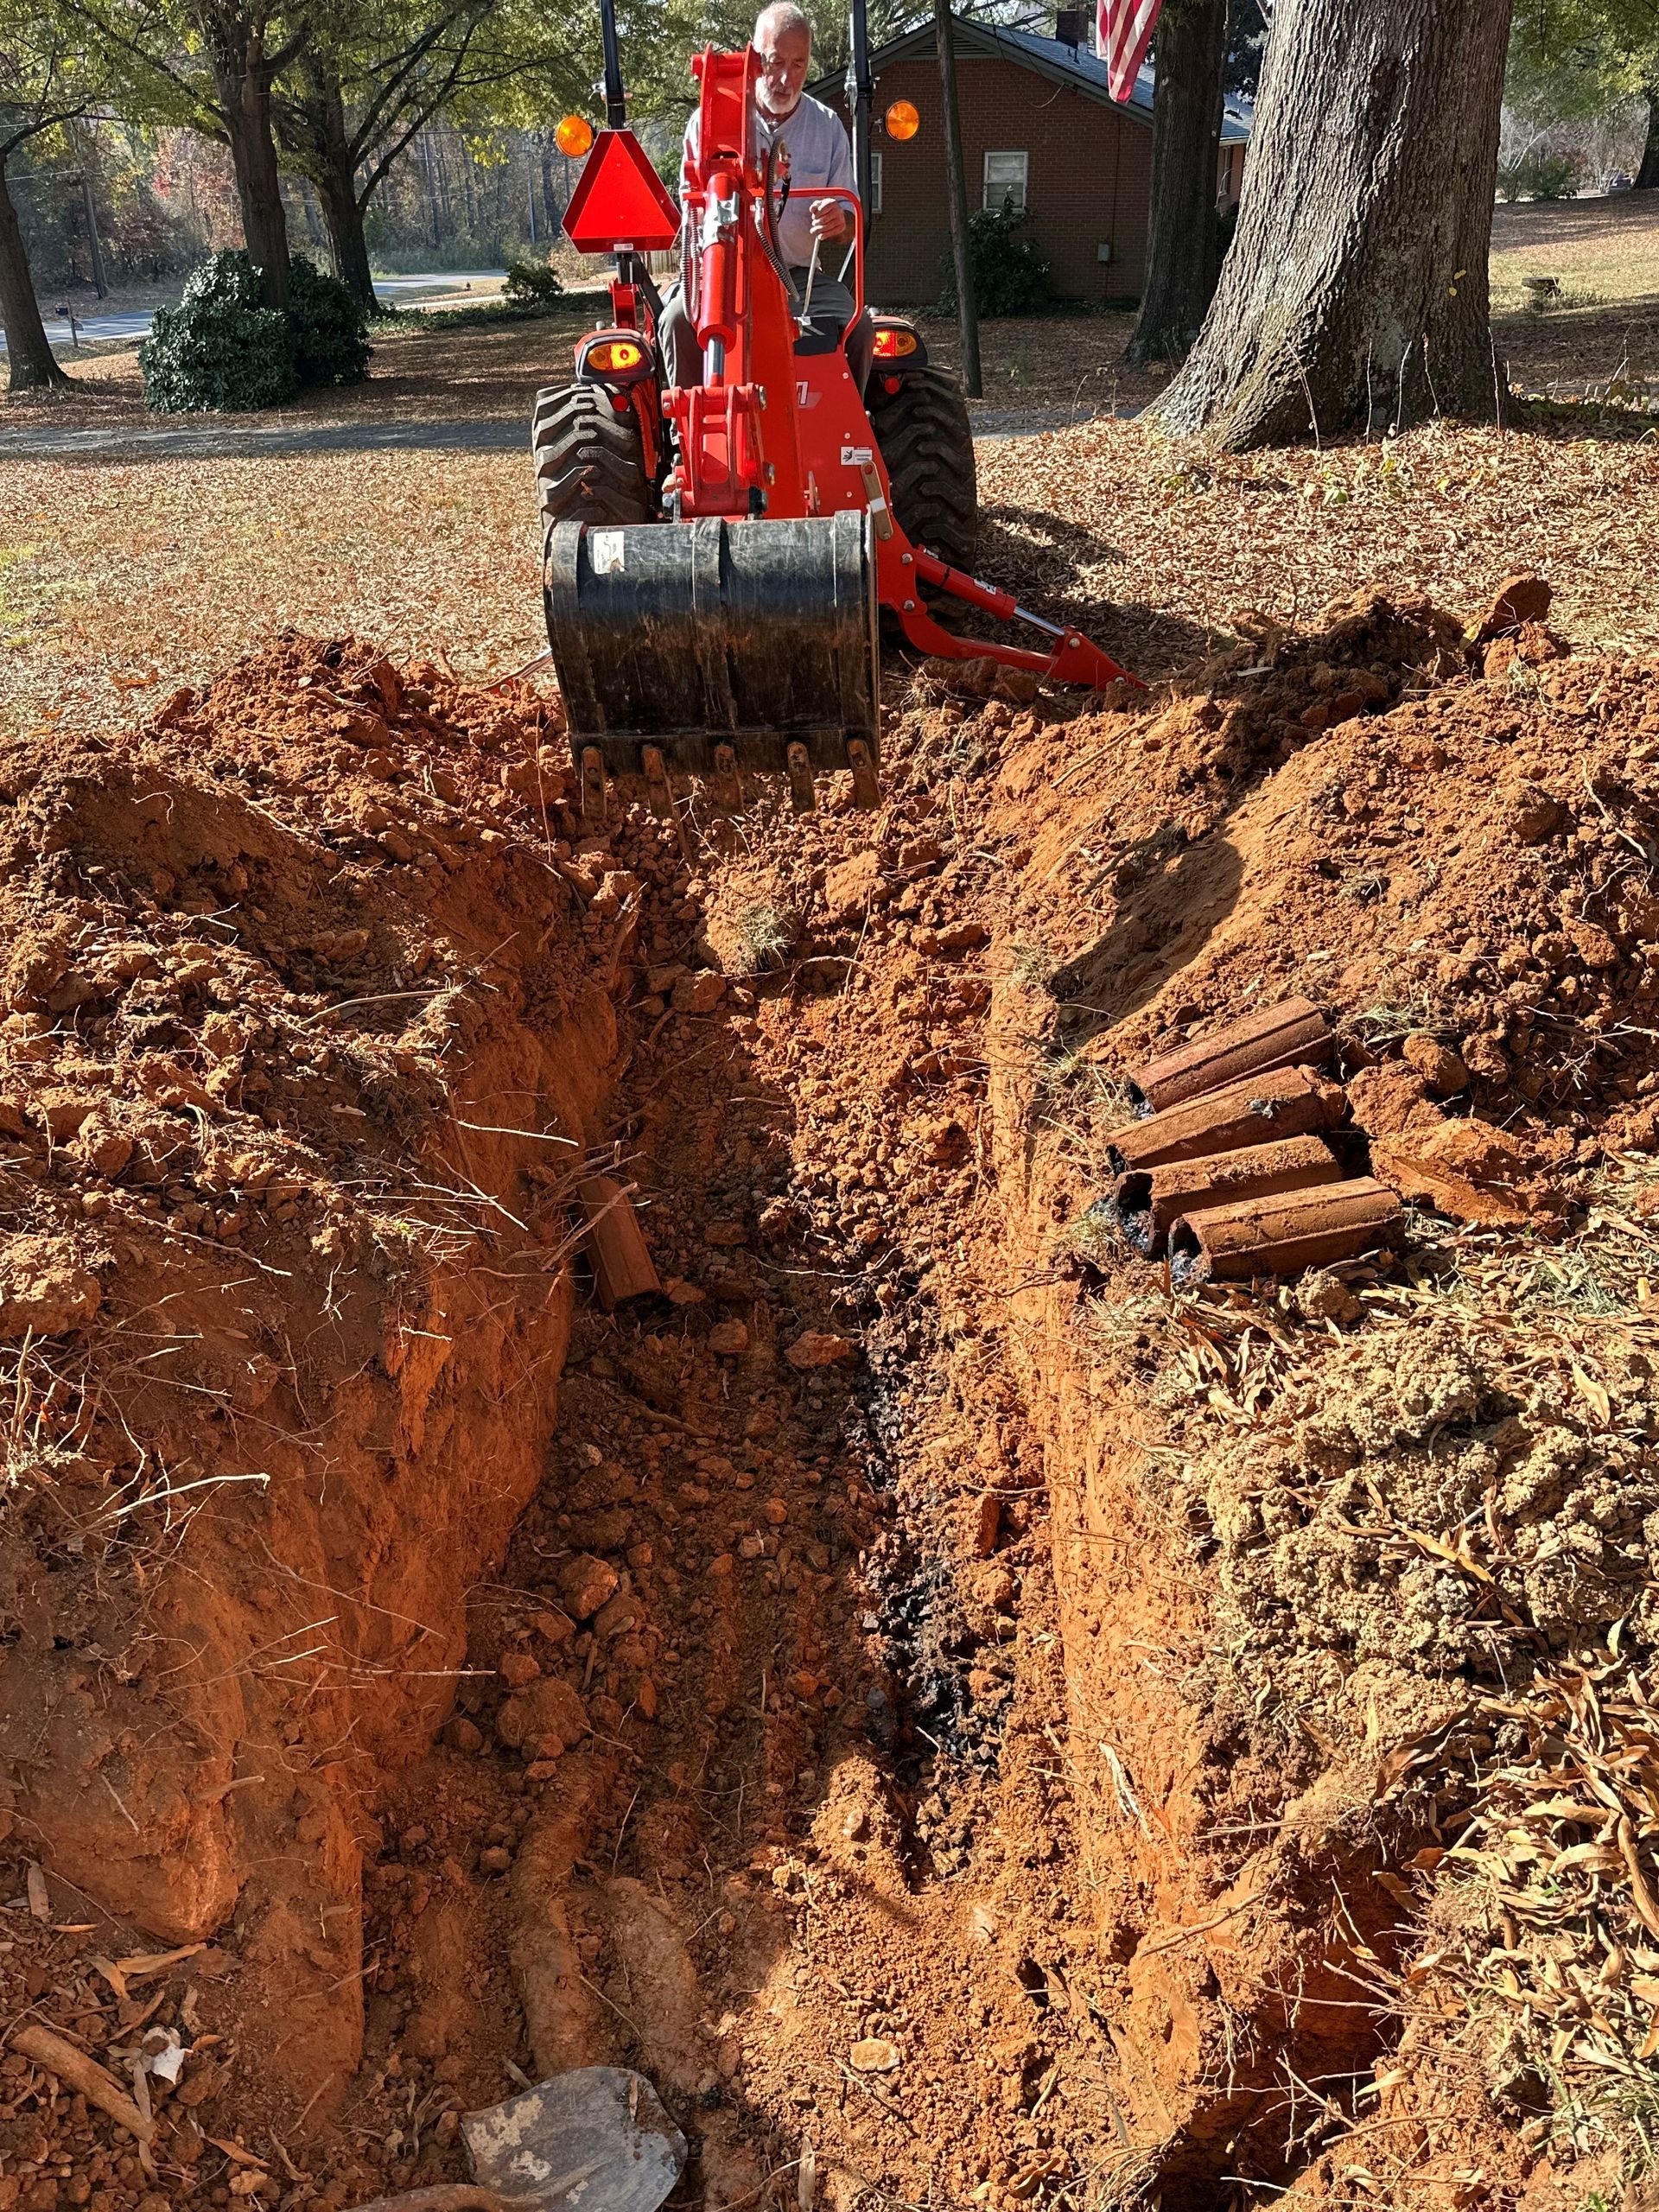 A Man Is Driving A Red Tractor In A Dirt Field - Clemmons, NC - Jetco Septic Service